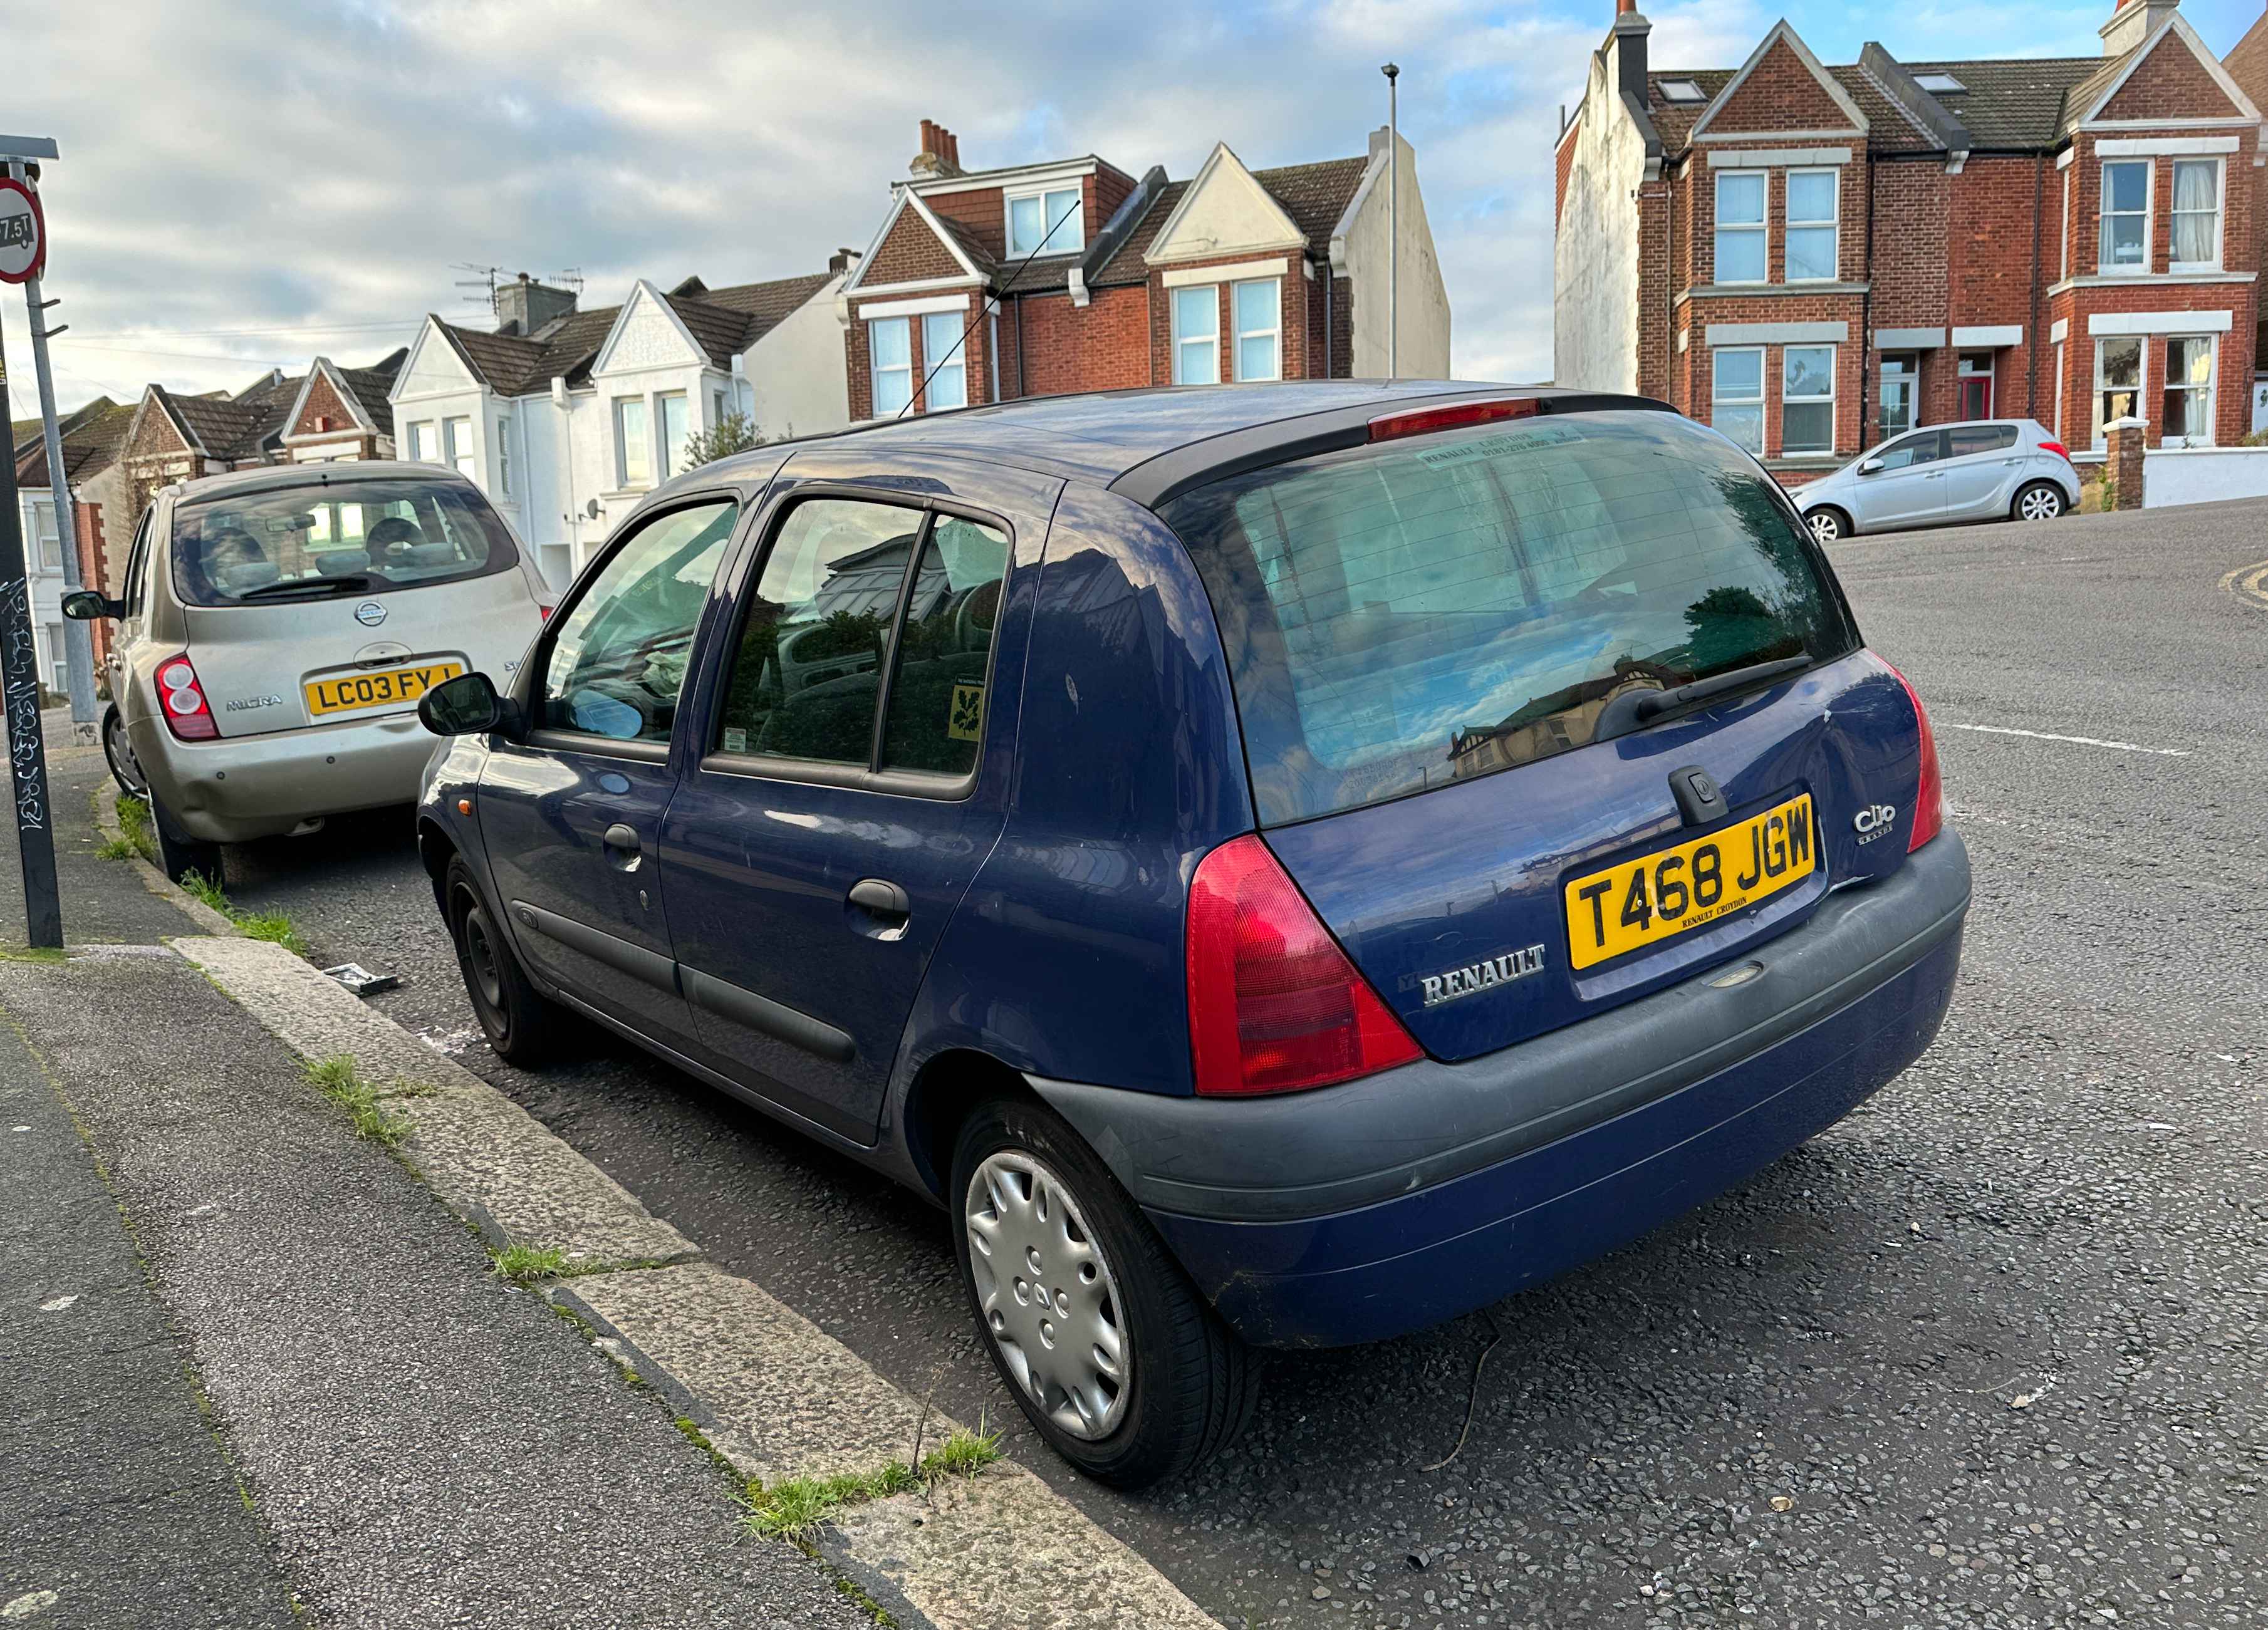 Photograph of T468 JGW - a Blue Renault Clio parked in Hollingdean by a non-resident. The second of two photographs supplied by the residents of Hollingdean.